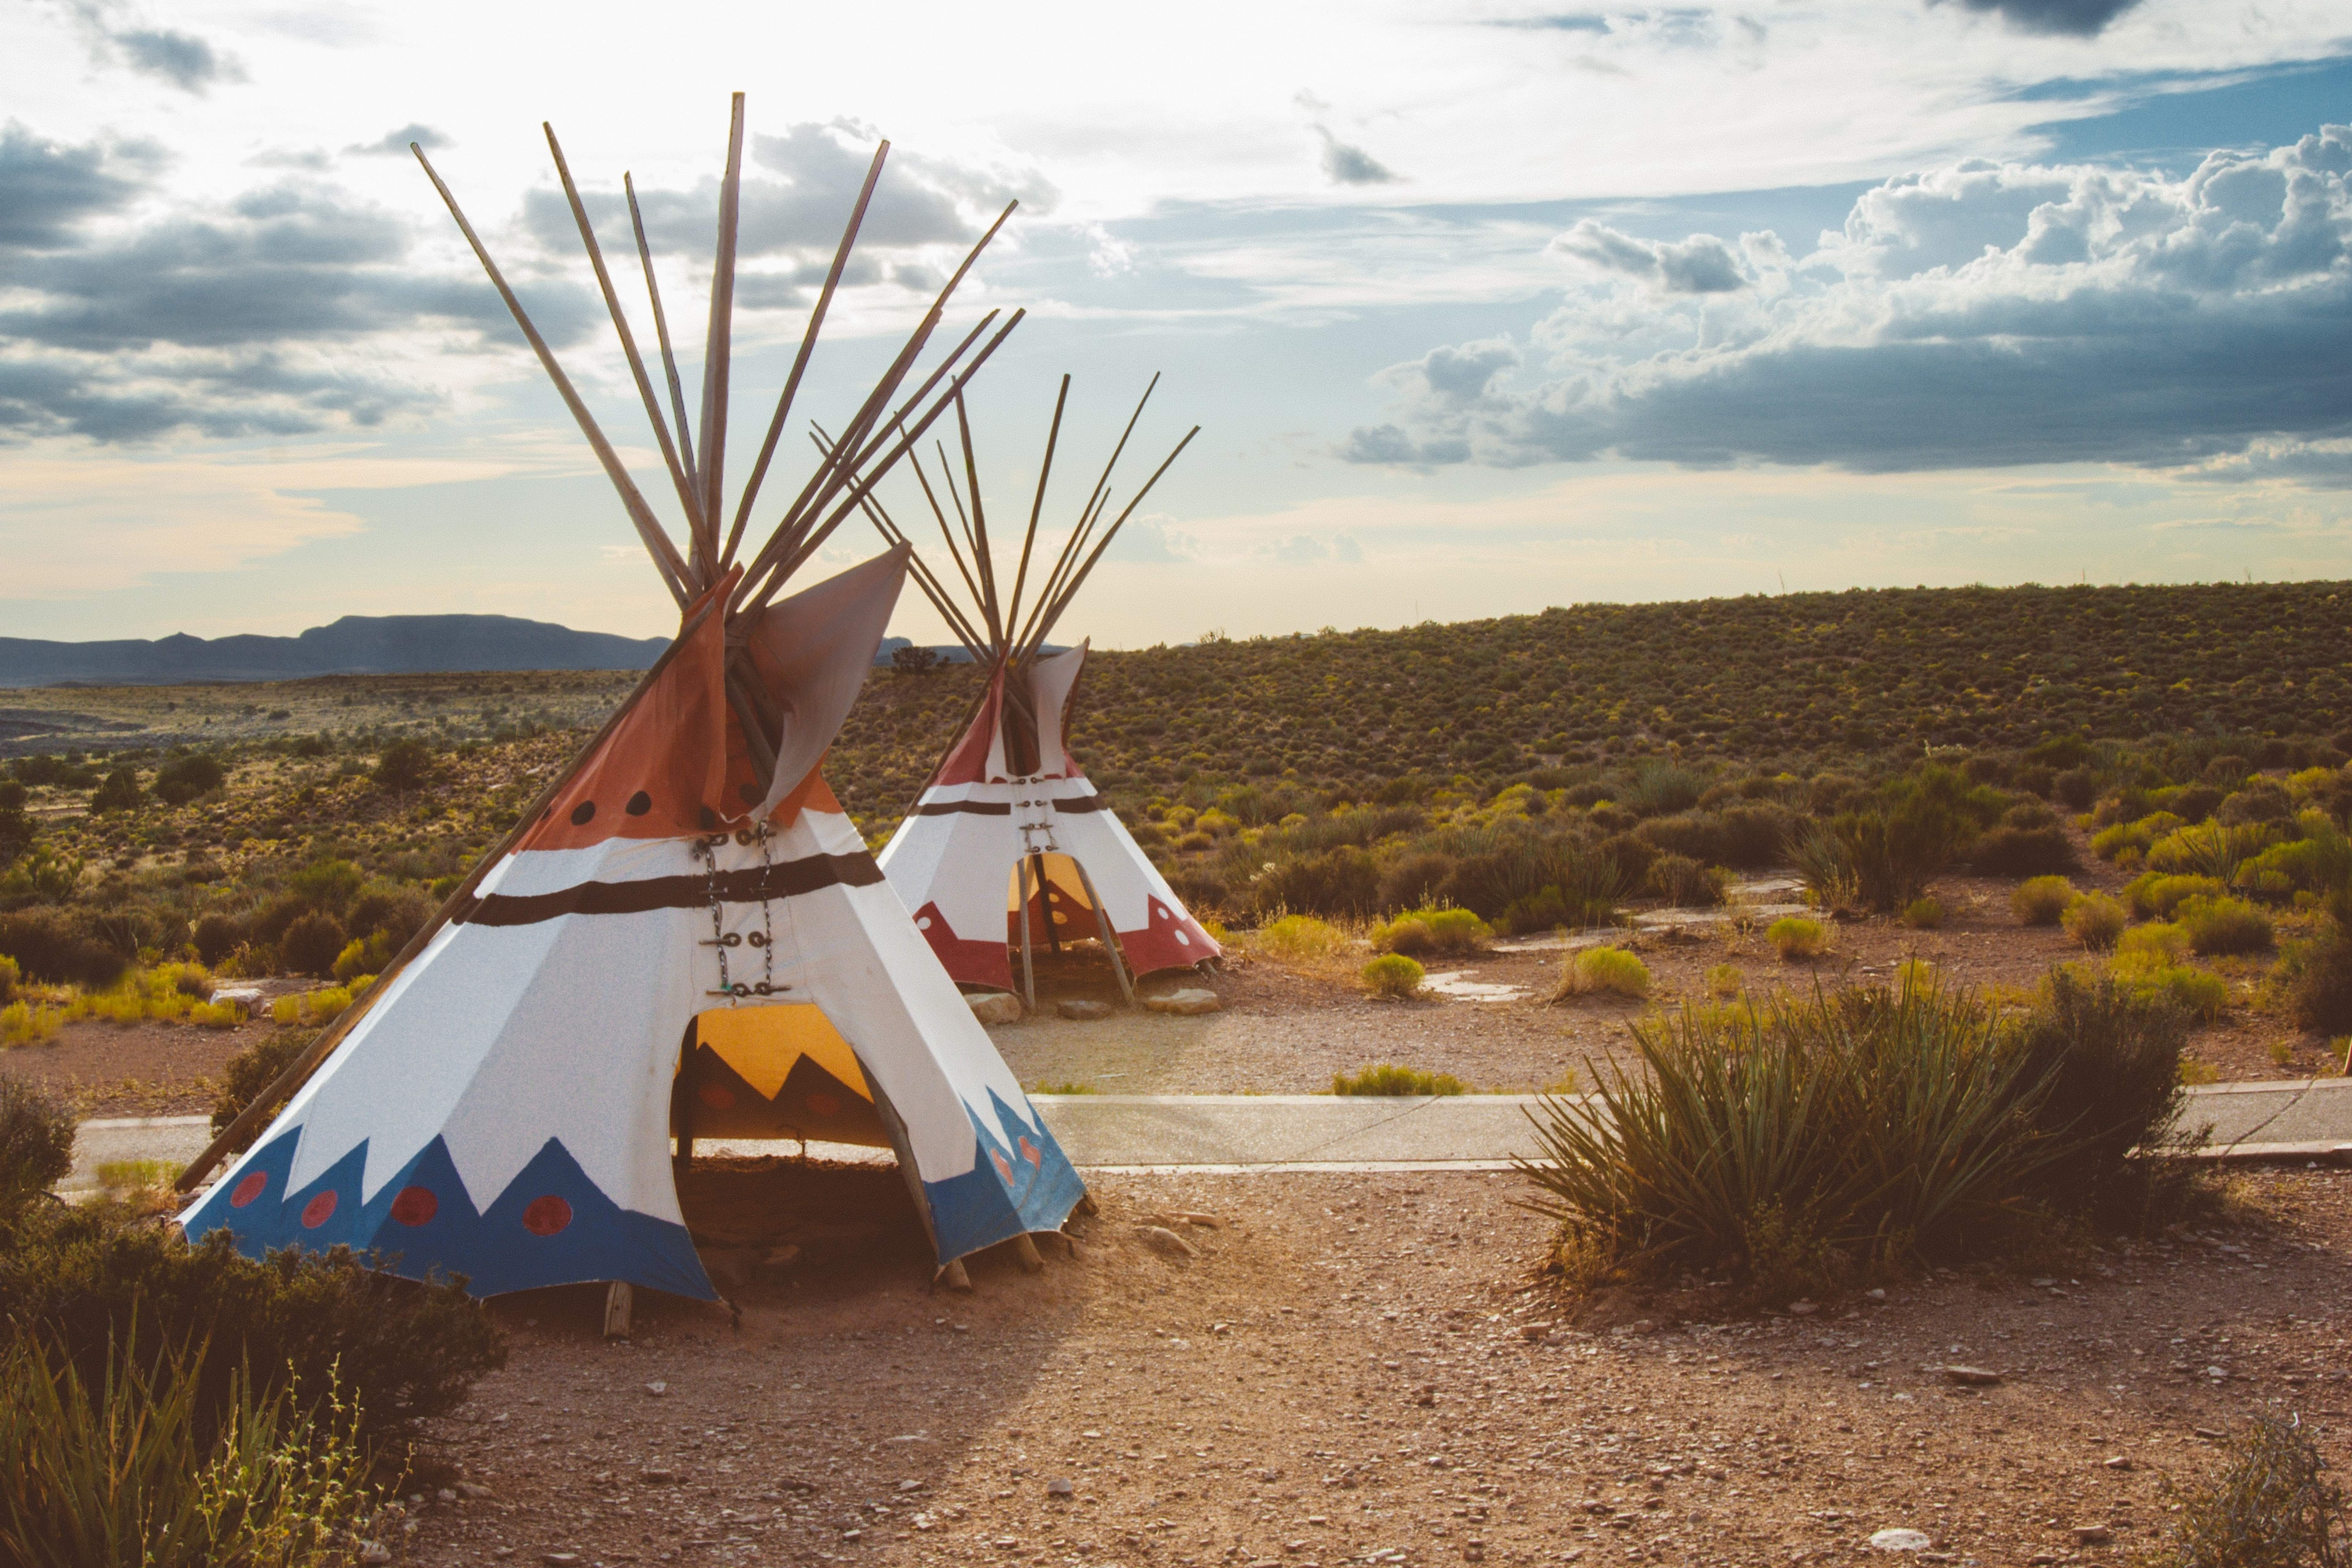 Desert landscape with tipis adjacent to a hiking trail.